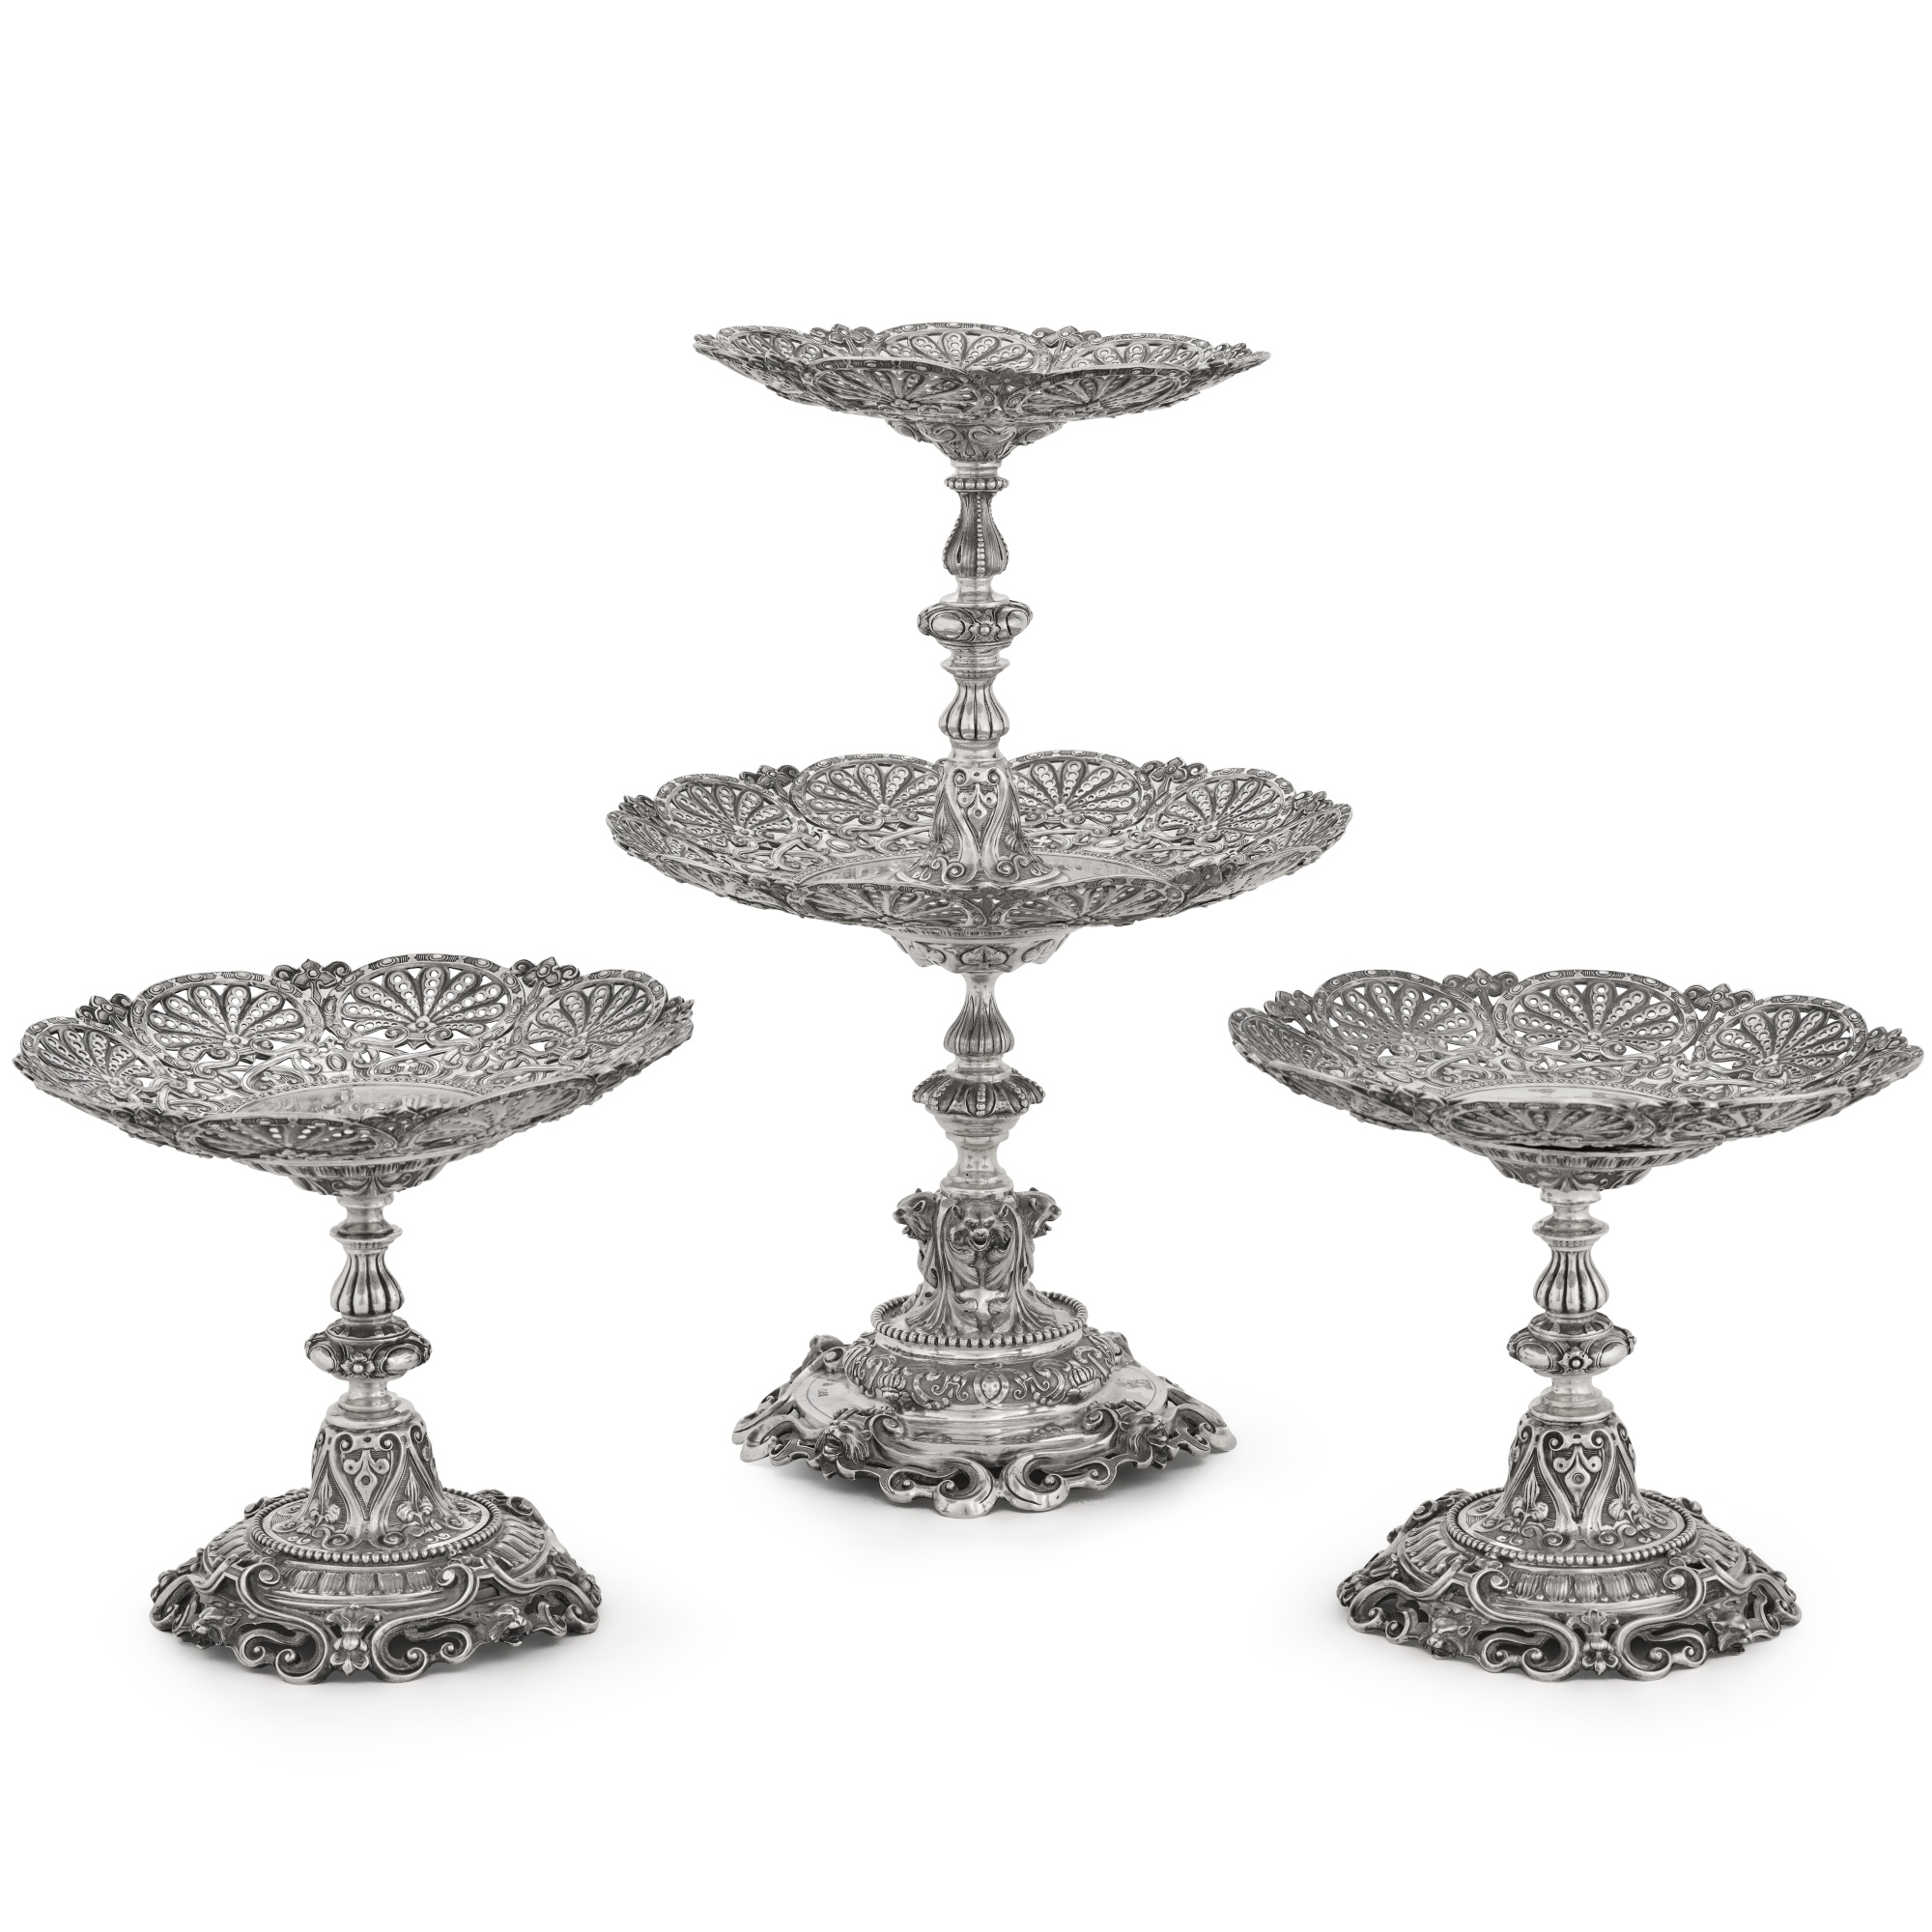 A suite of Victorian silver comports, Garrard & Co., London, 1862 - Image 4 of 5